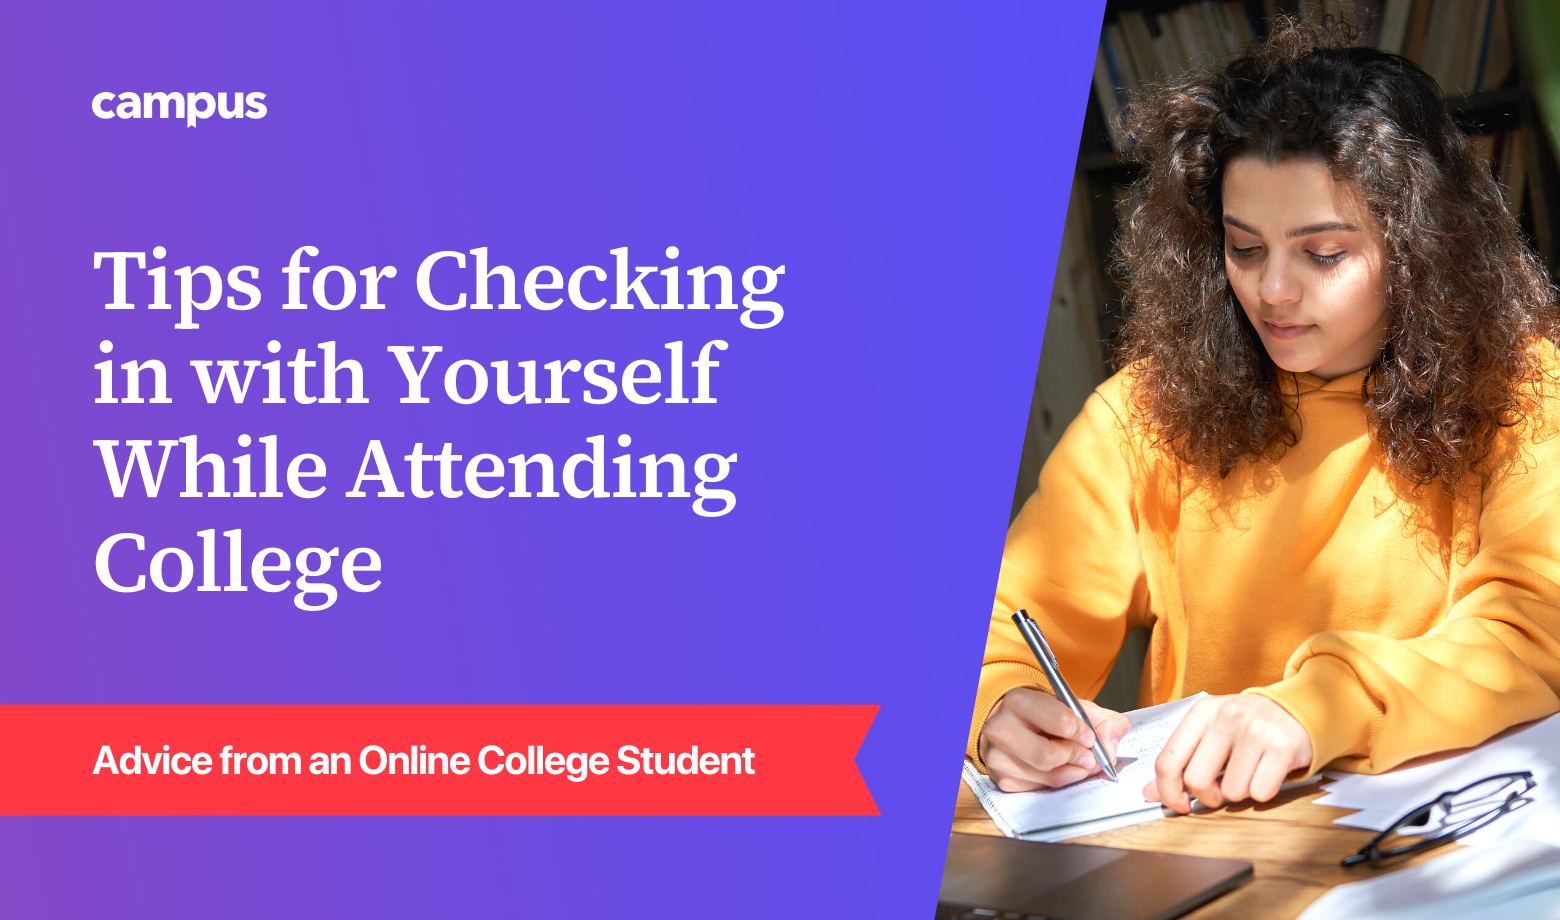 Self-Care Tips for Online College Students